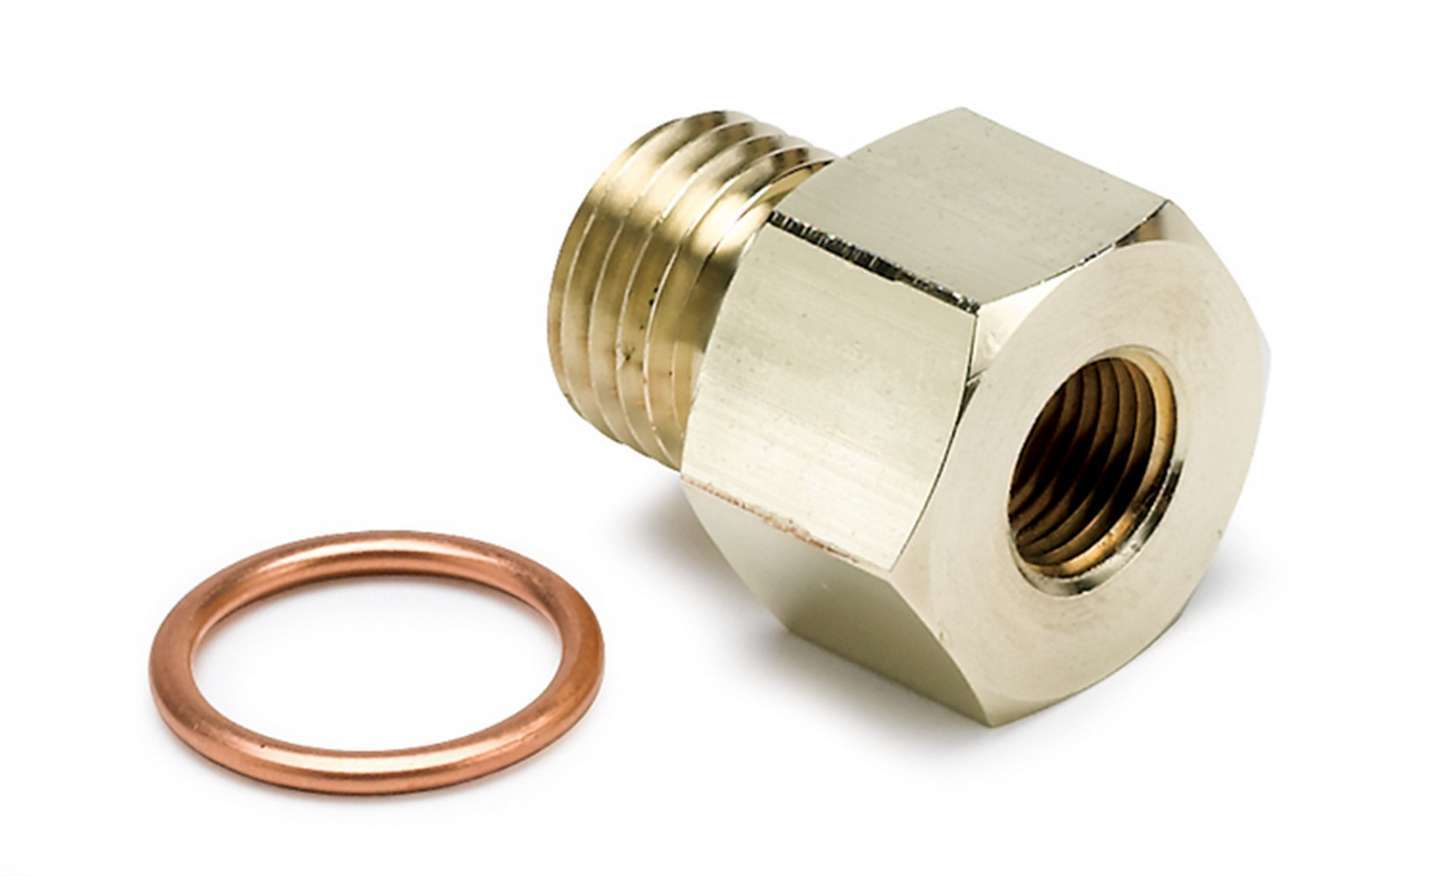 Auto Meter Fitting, Adapter, Straight, 14 mm x 1.50 Male to 1/8" NPT Female, Brass, Natural, Oil Pressure Gauges, Each